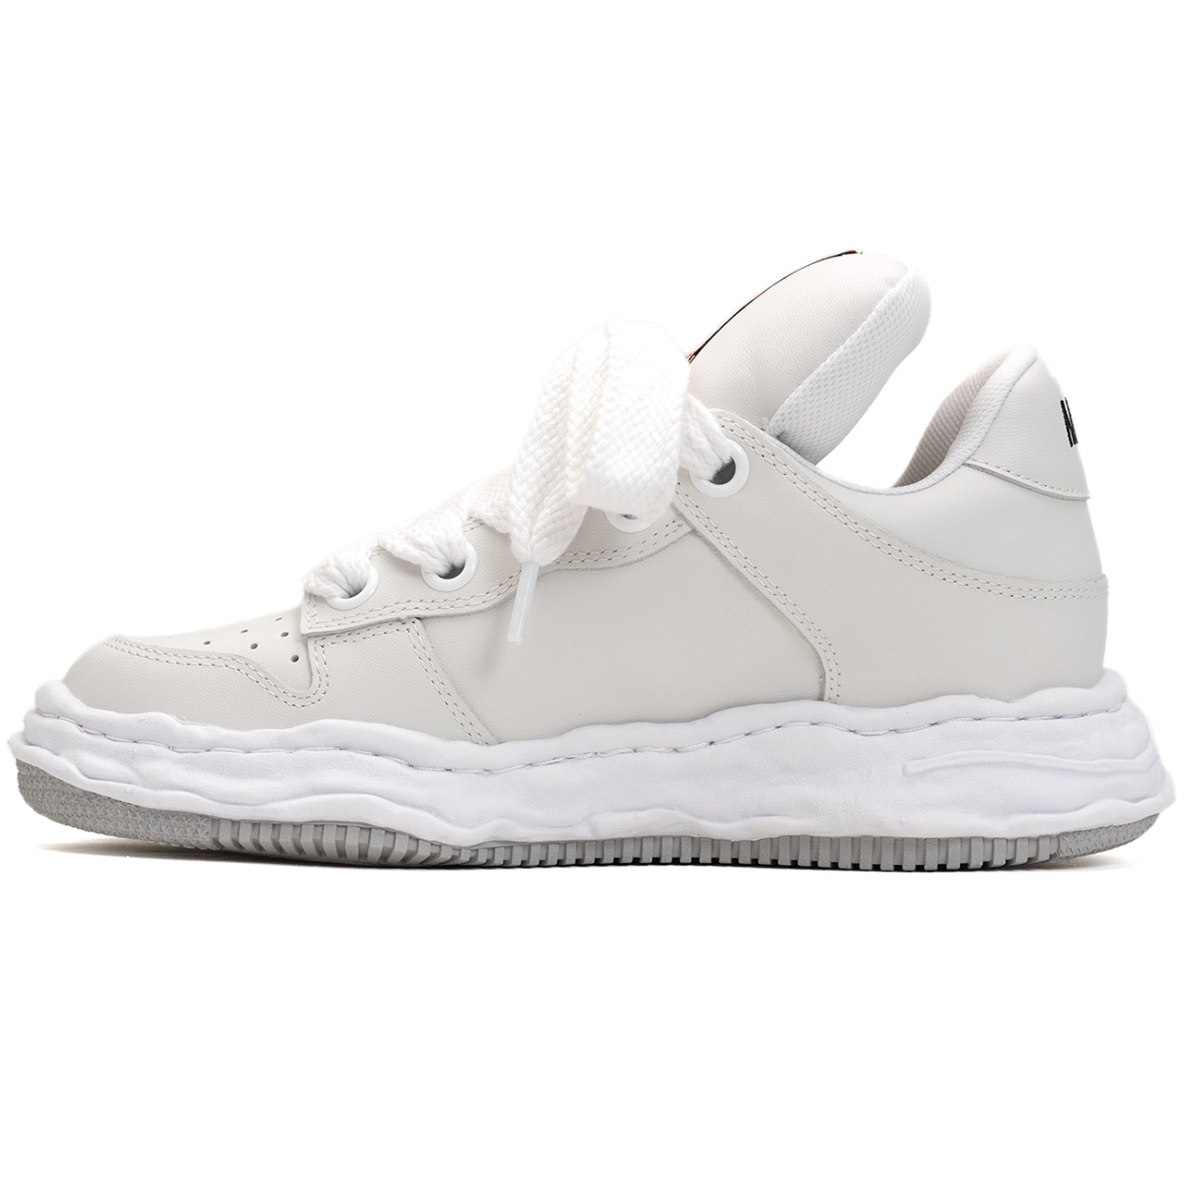 Maison Mihara "WAYNE PUFFER" OG Sole White Leather Low-top Sneaker